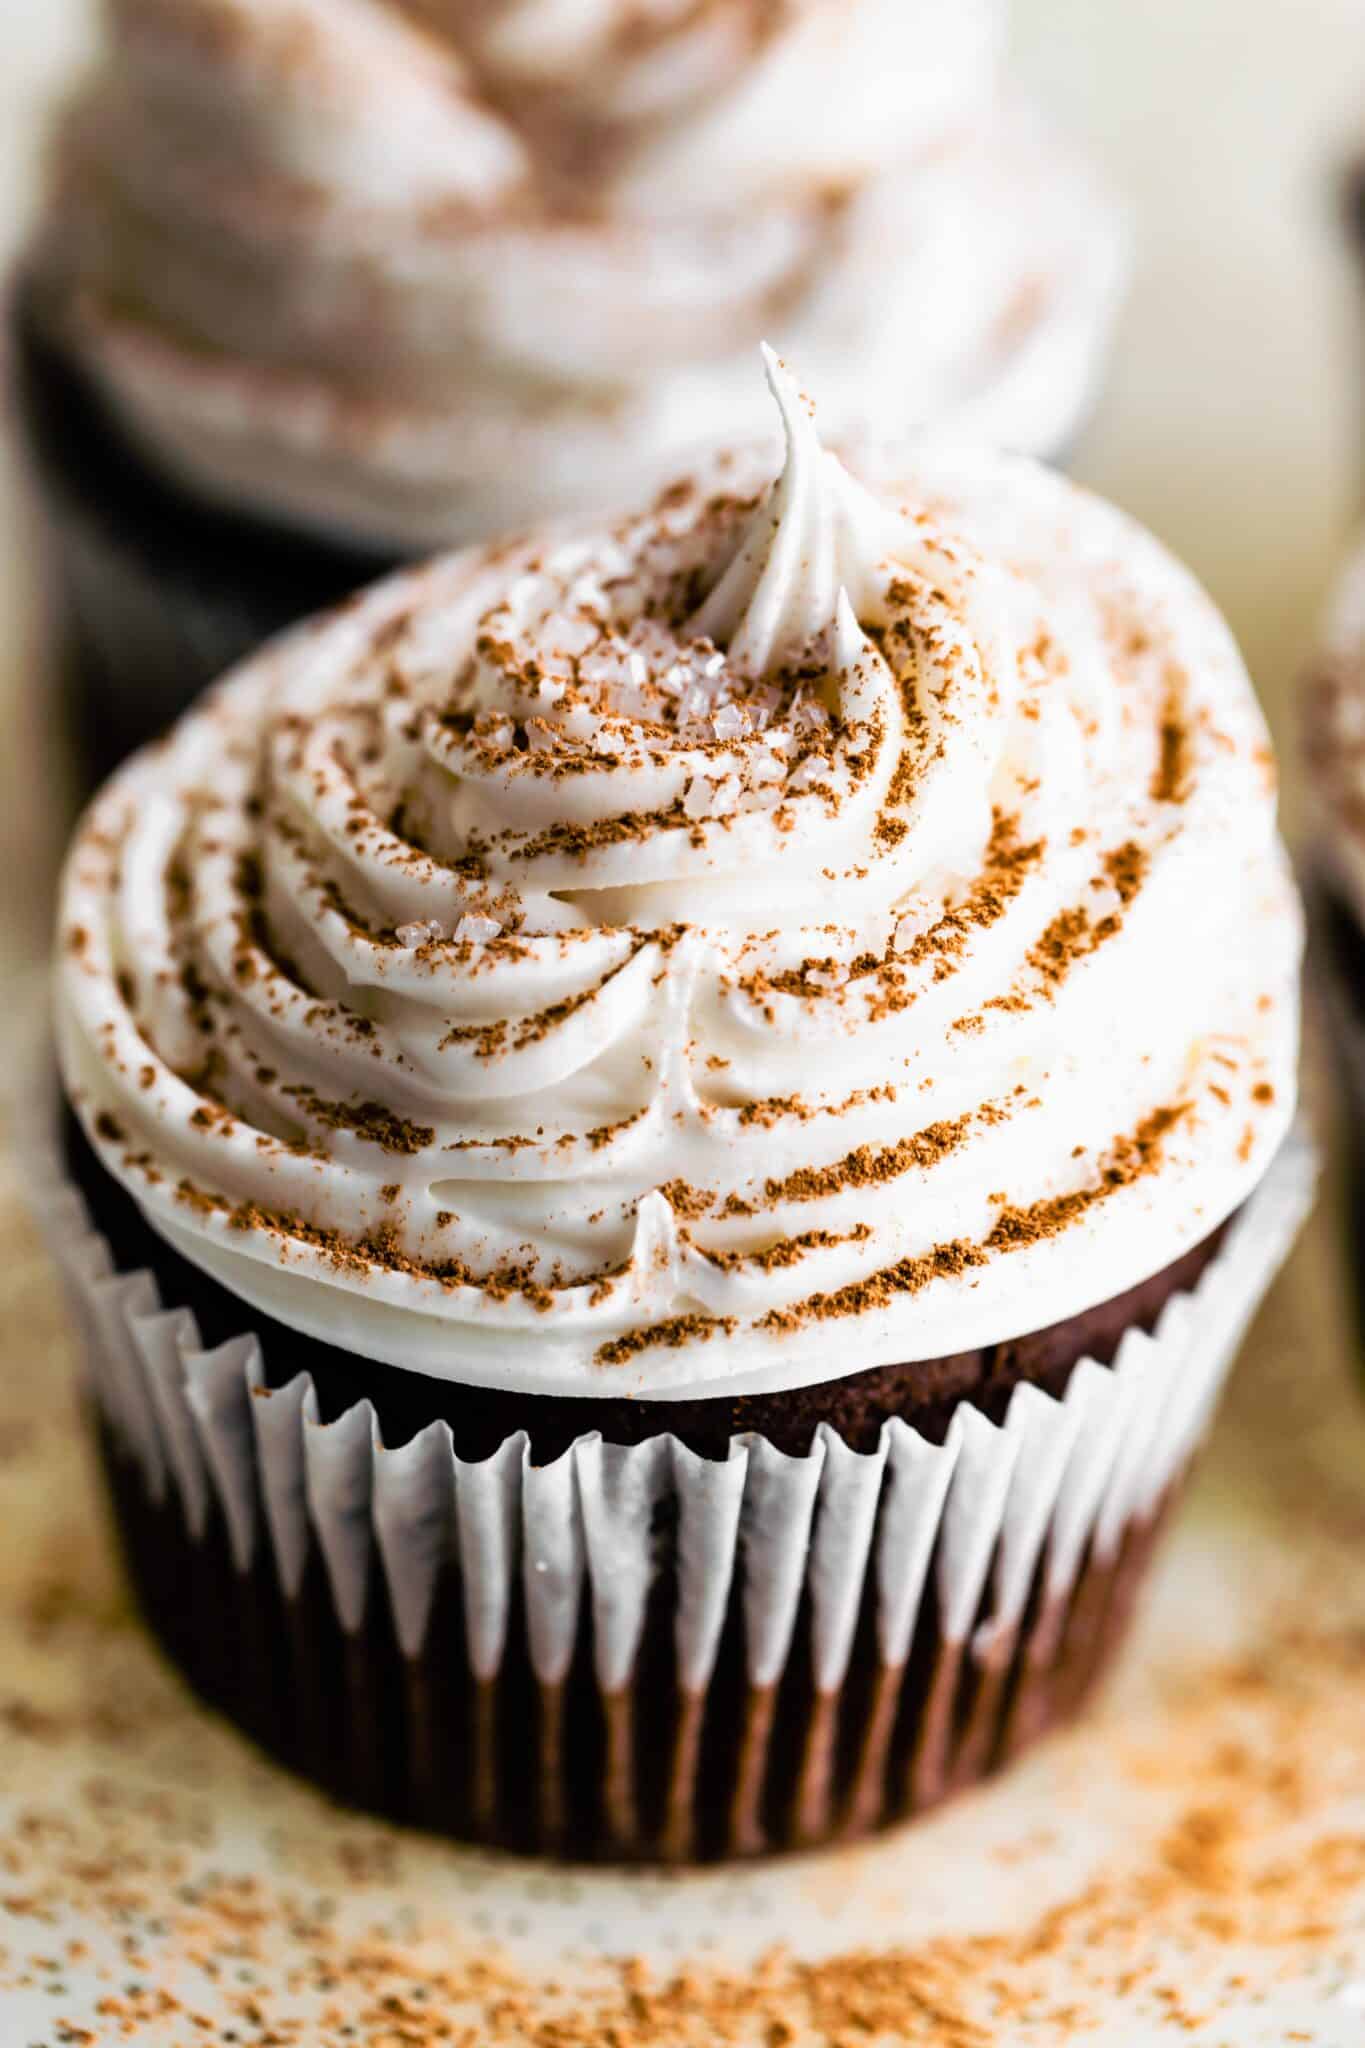 Up close photo of a gluten free chocolate cupcake with vanilla frosting.